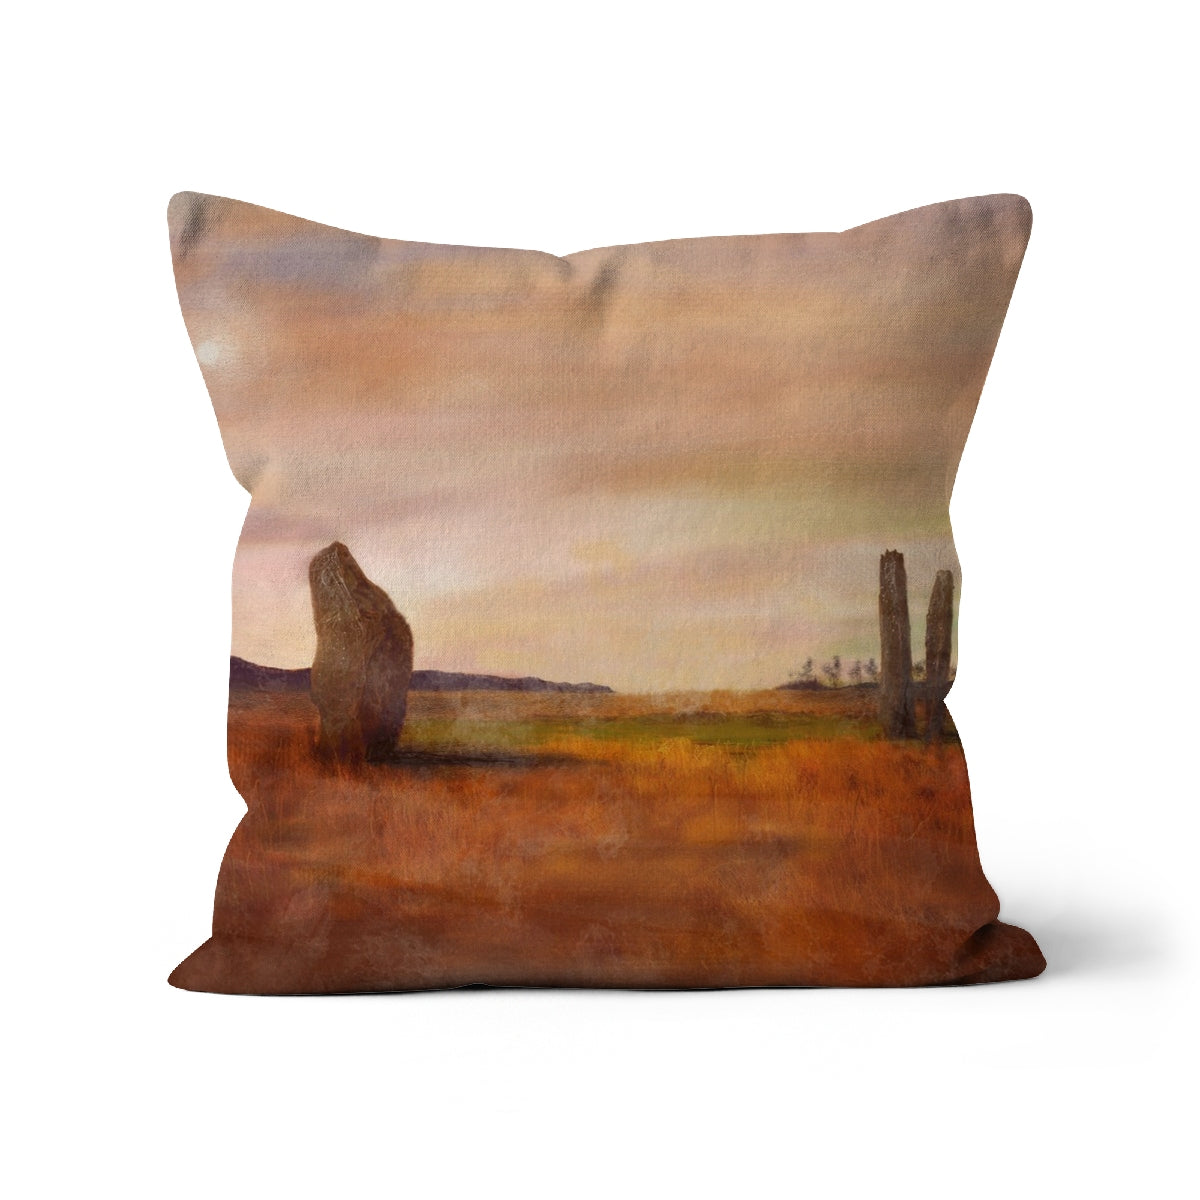 Machrie Moor Arran Art Gifts Cushion-Cushions-Arran Art Gallery-Canvas-16"x16"-Paintings, Prints, Homeware, Art Gifts From Scotland By Scottish Artist Kevin Hunter